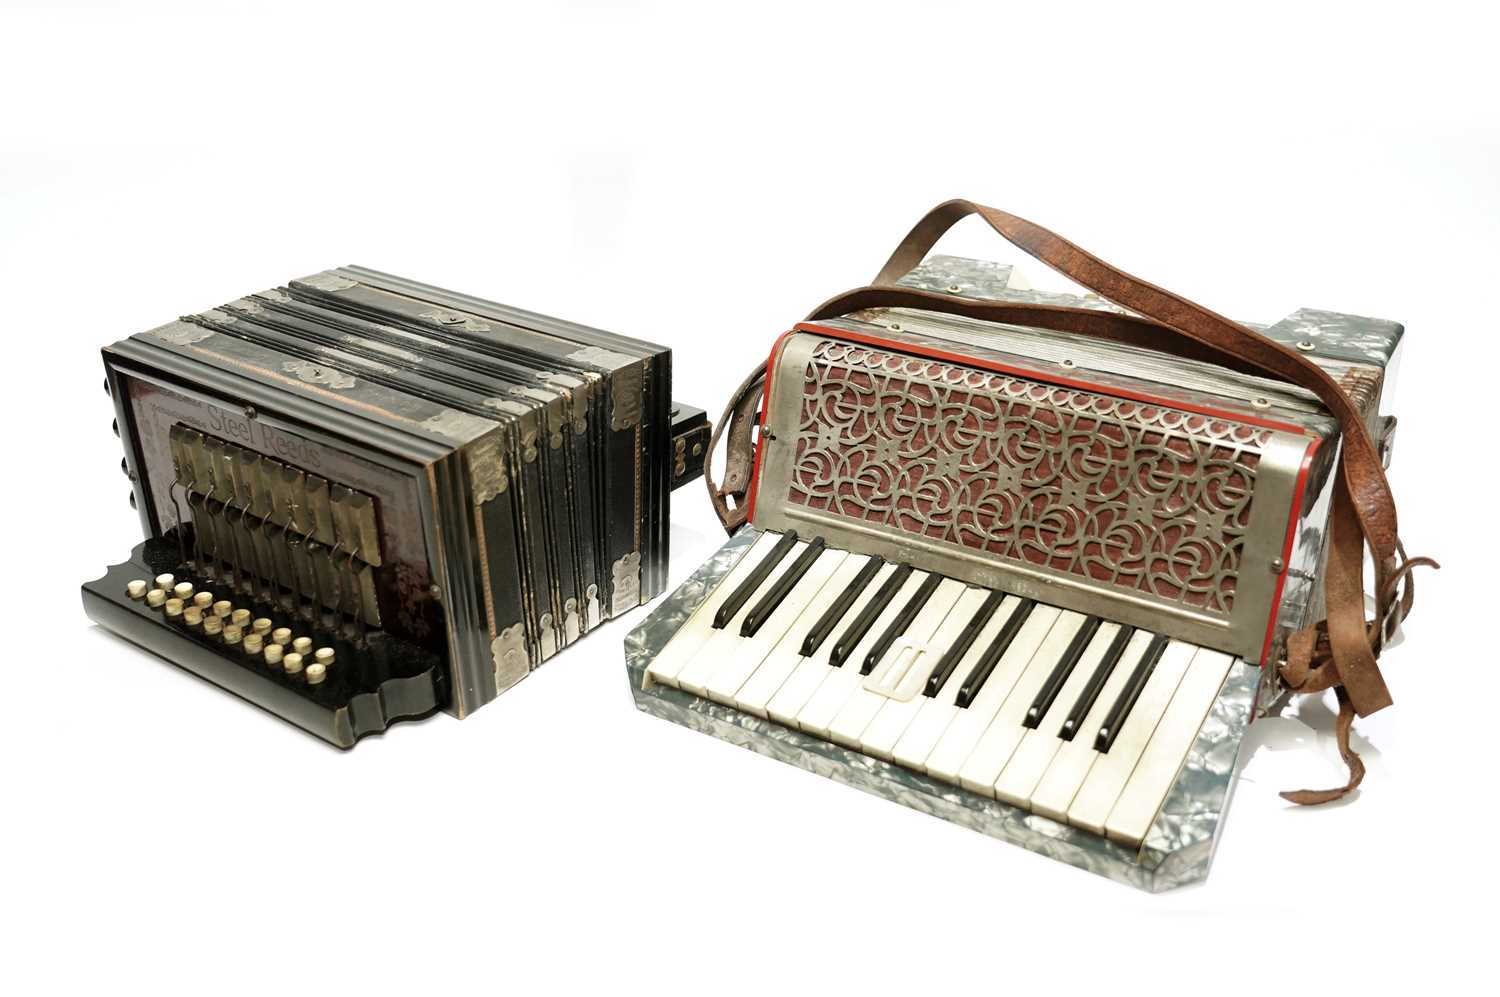 Empress 19-button Melodeon, and an Accordion